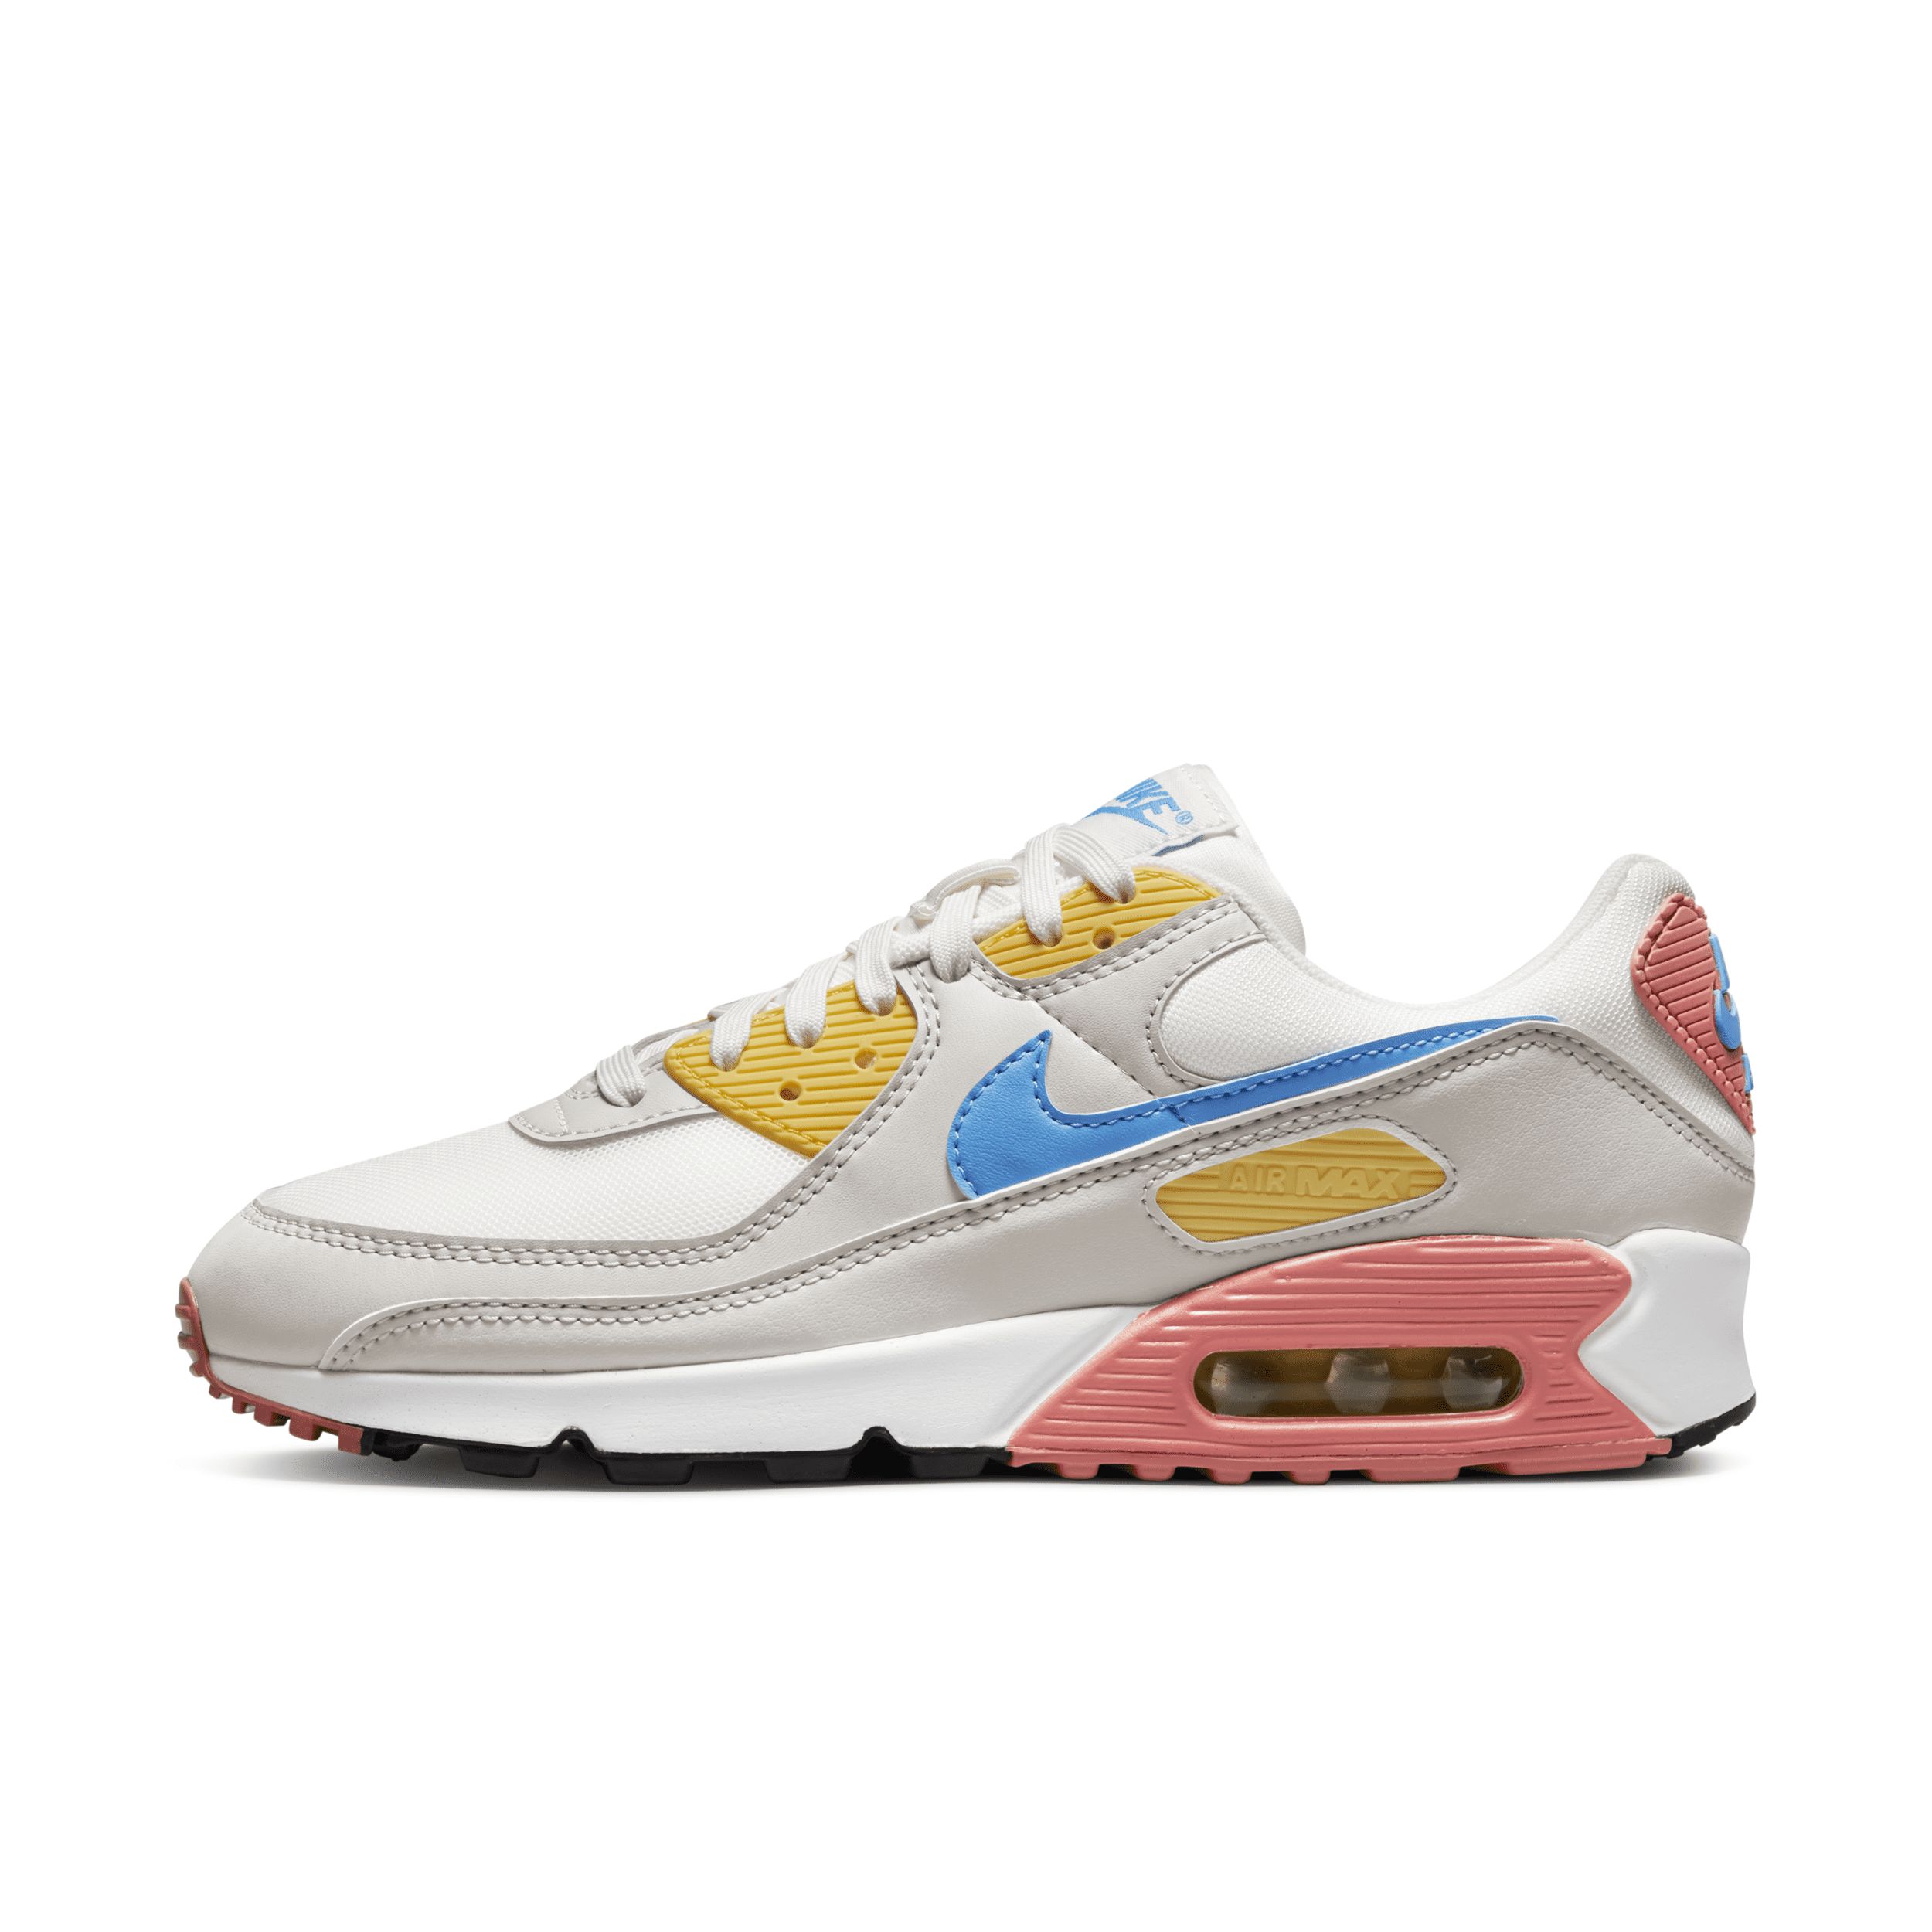 Nike Women's Air Max 90 Shoes in White, Size: 8.5 | DJ9991-100 | Nike (US)